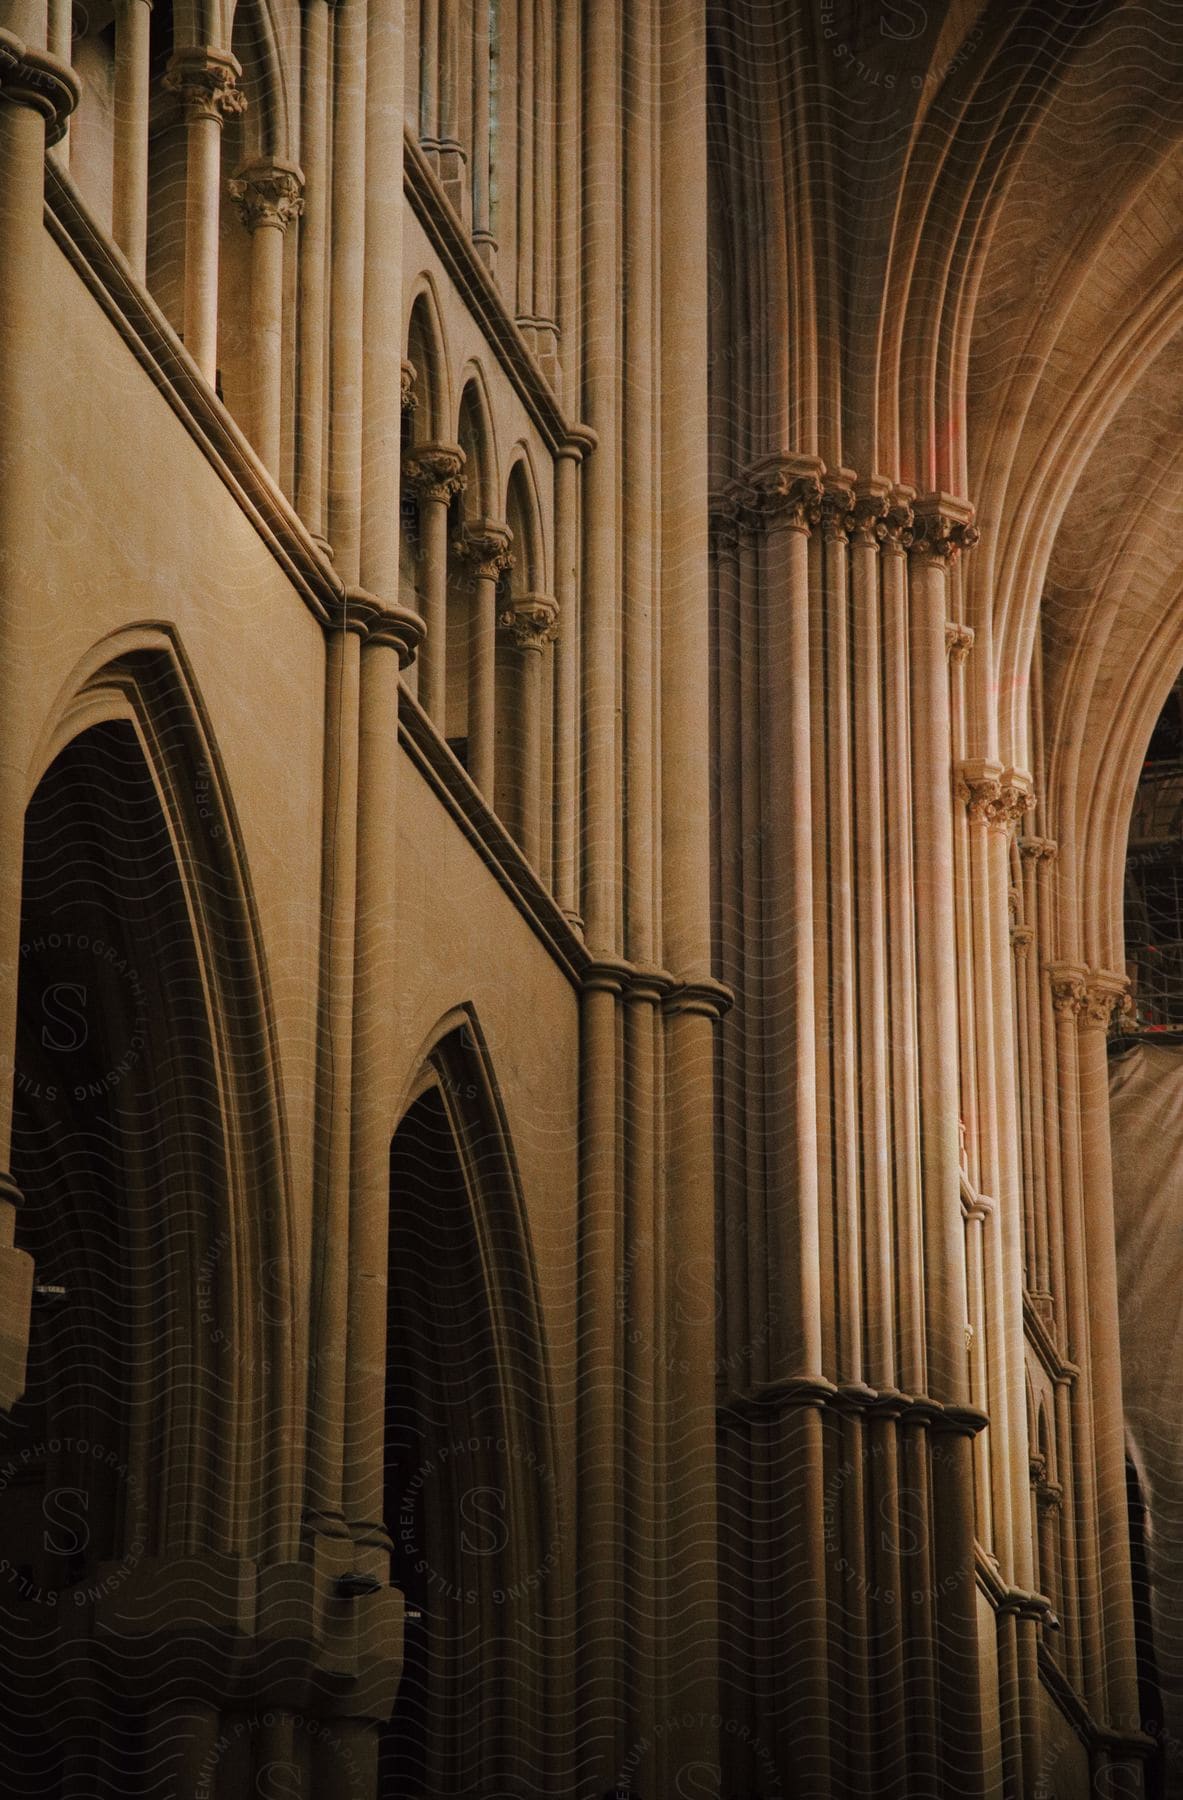 Interior architectural detail of a cathedral showing a series of tall, arched columns and ribbed vaulting.